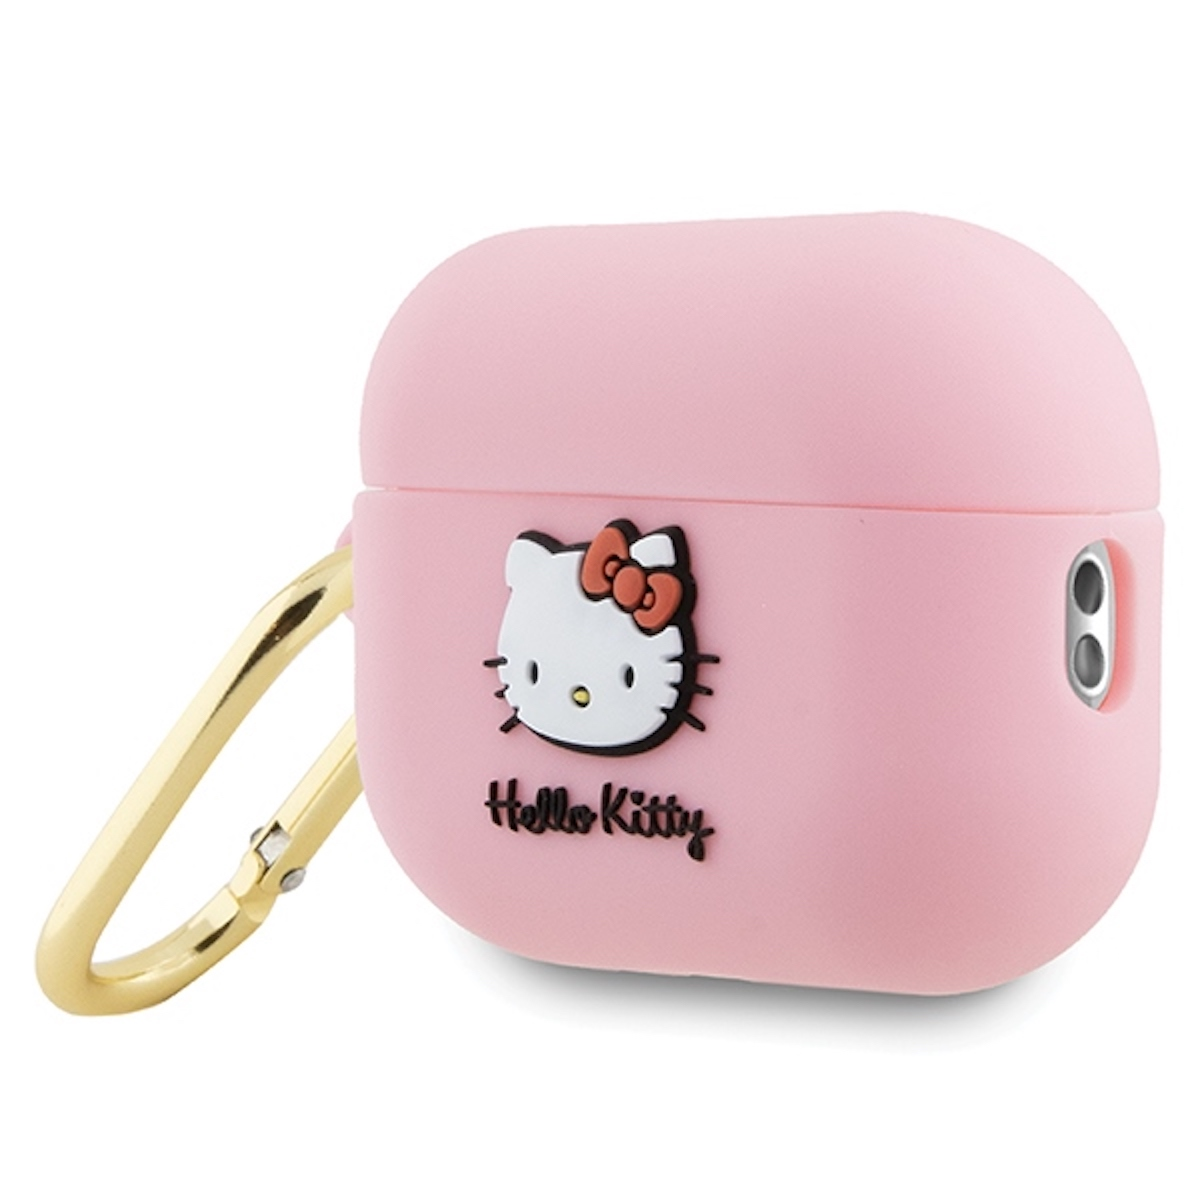 HELLO KITTY BY CHEFMADE AirPods 2. 3D Silikon Schutzhülle, Hülle Generation, Tasche Full Apple, AirPods Pro Rosa Cover, Kitty Head